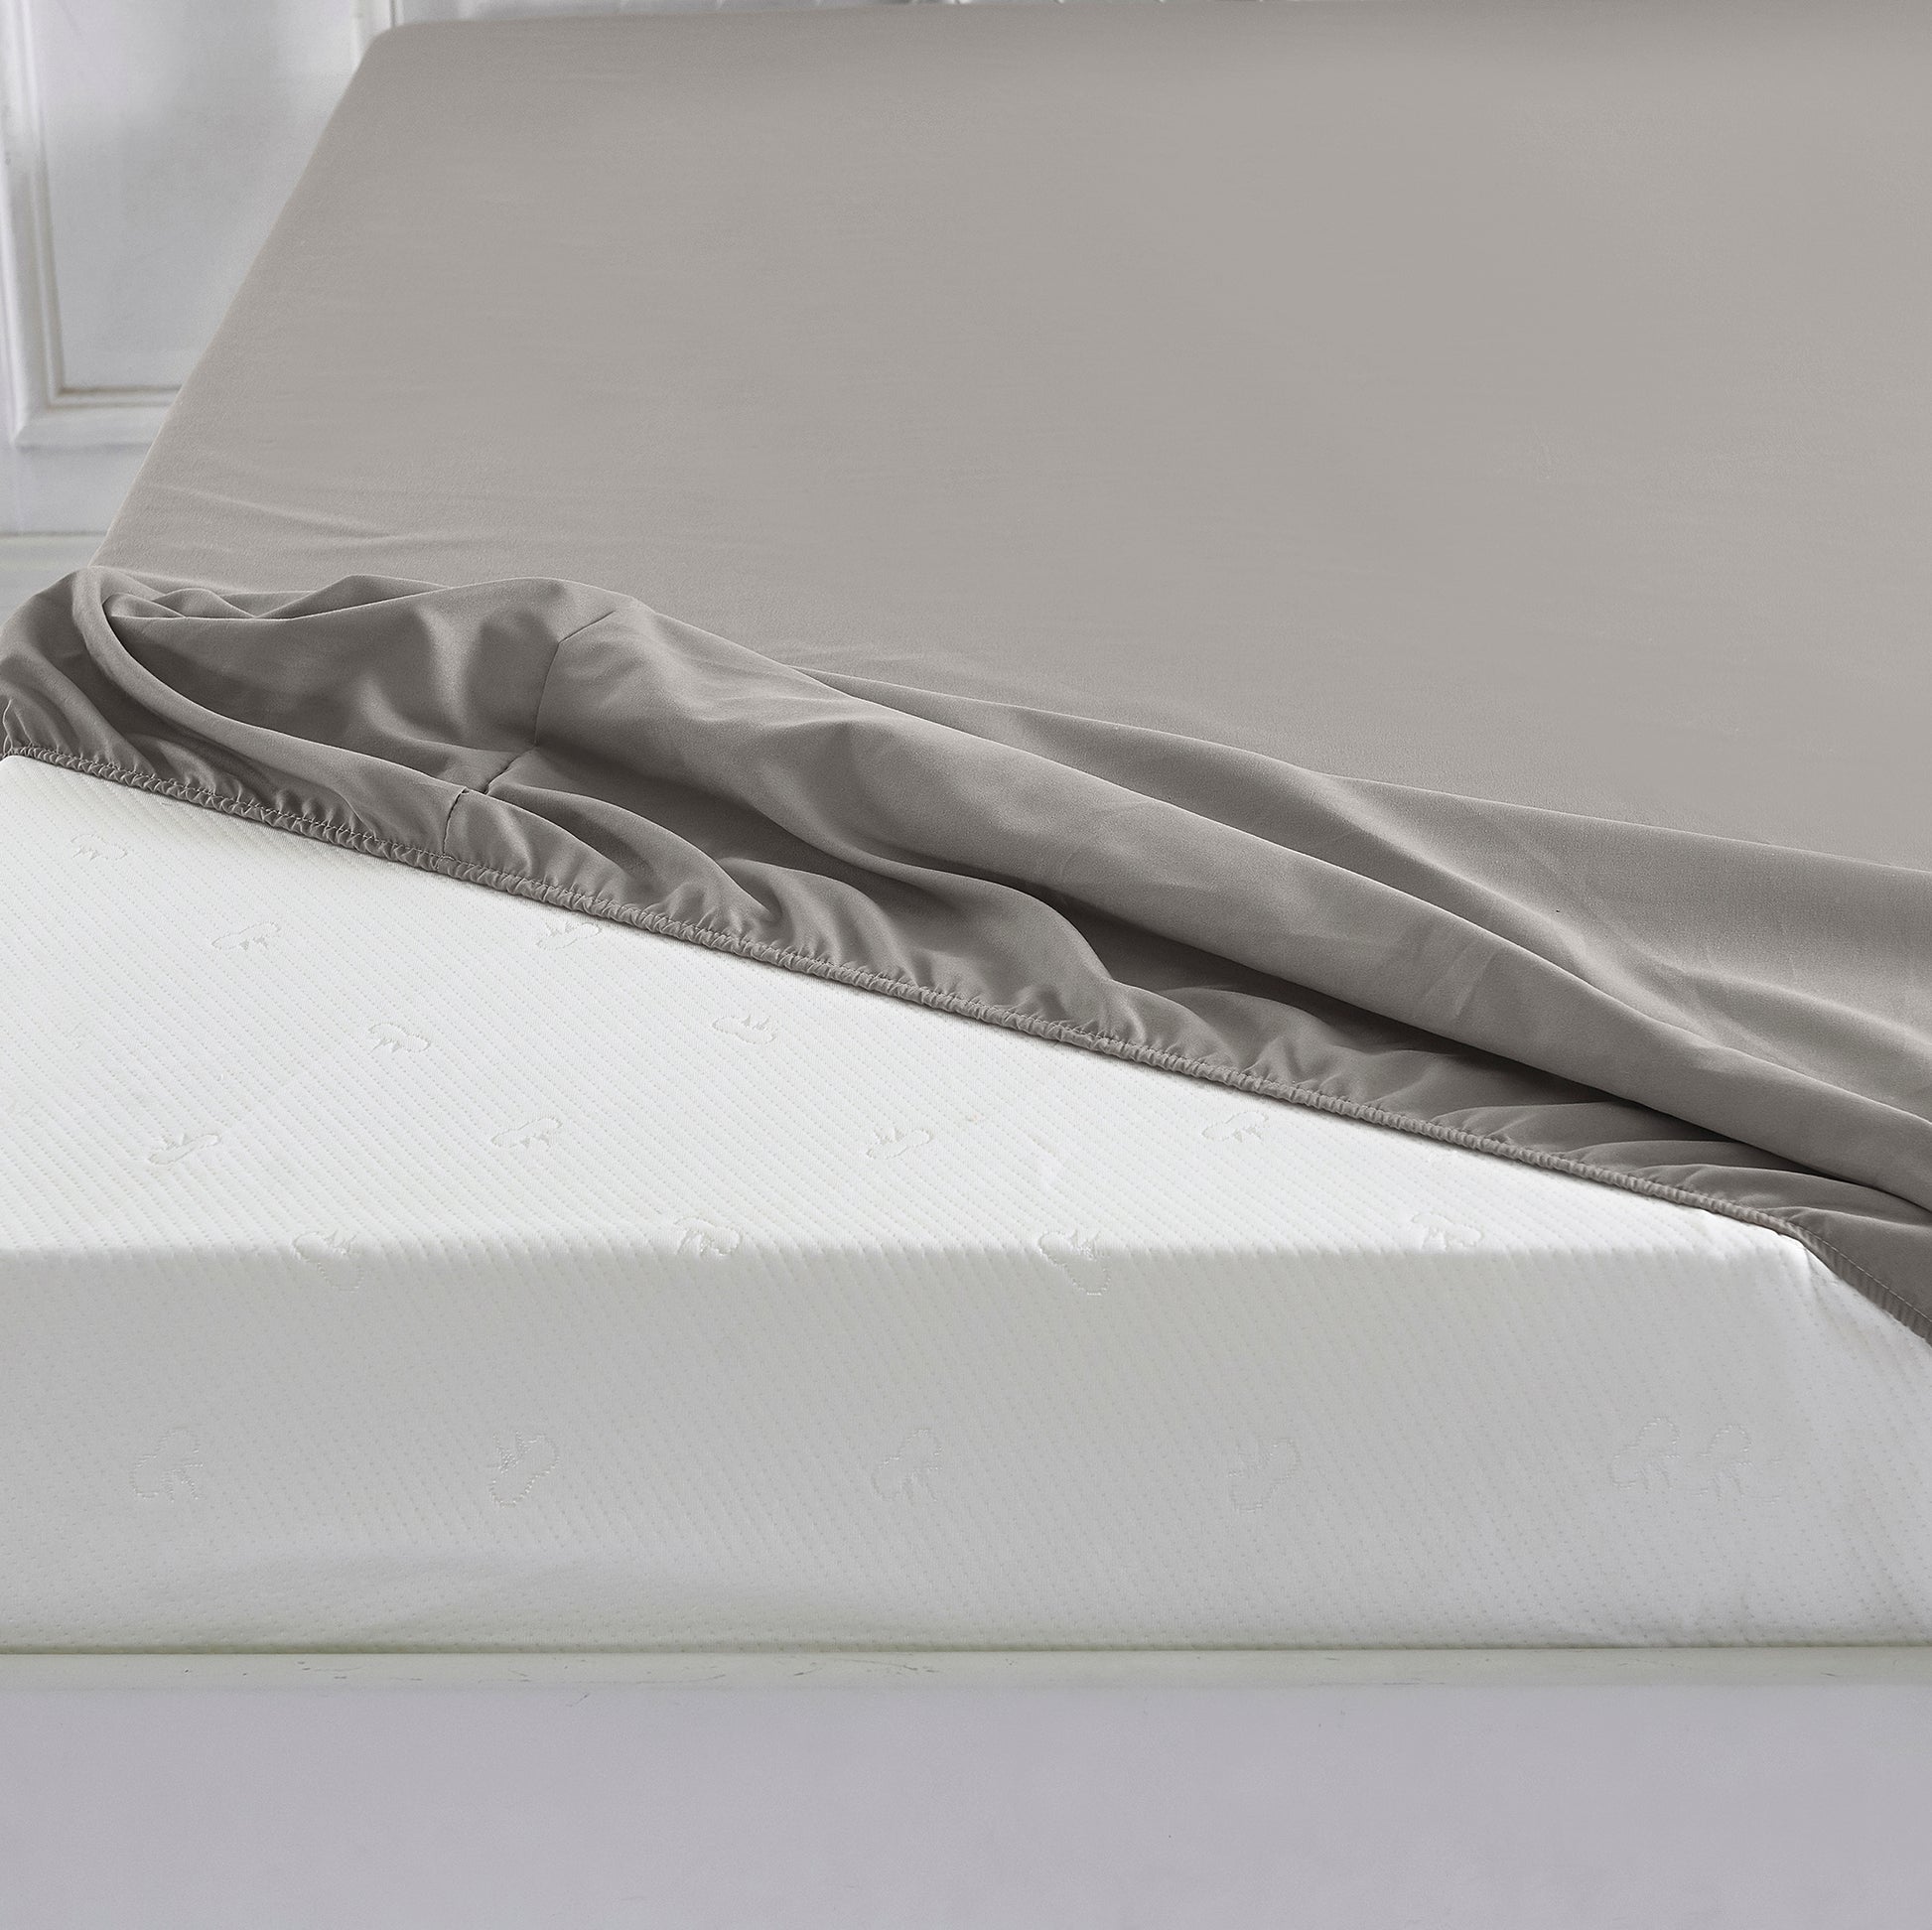 Extra Deep Pocket Fitted Sheet - Single Fitted Sheet Only - Extra Deep  Pockets Queen Size Sheets - Fits 18 In to 24 In Mattress Twin White